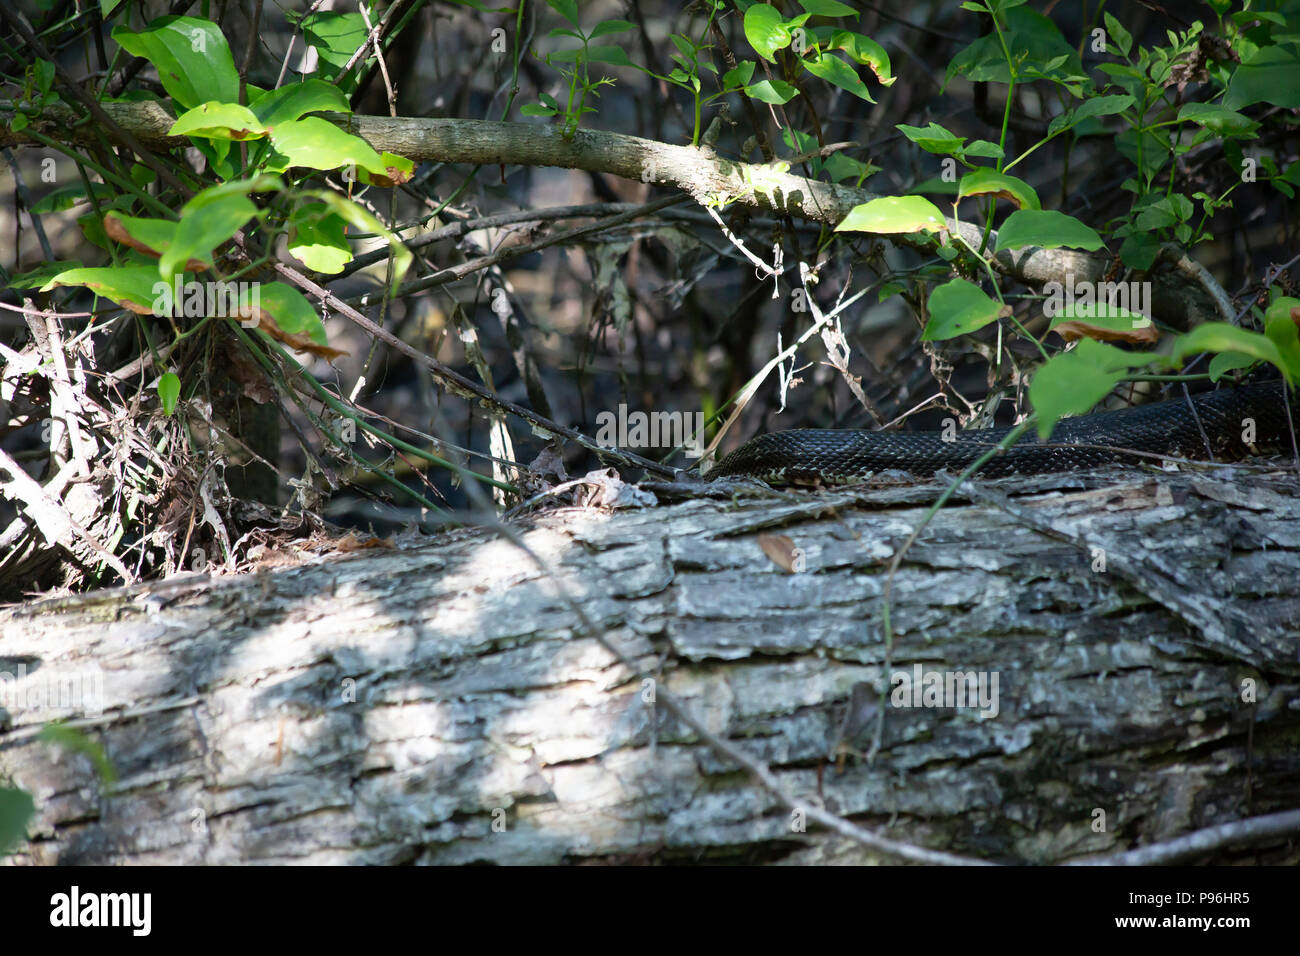 Western rat snake (Pantherophis obsoletus), also known as a chicken snake, crawling over a log Stock Photo